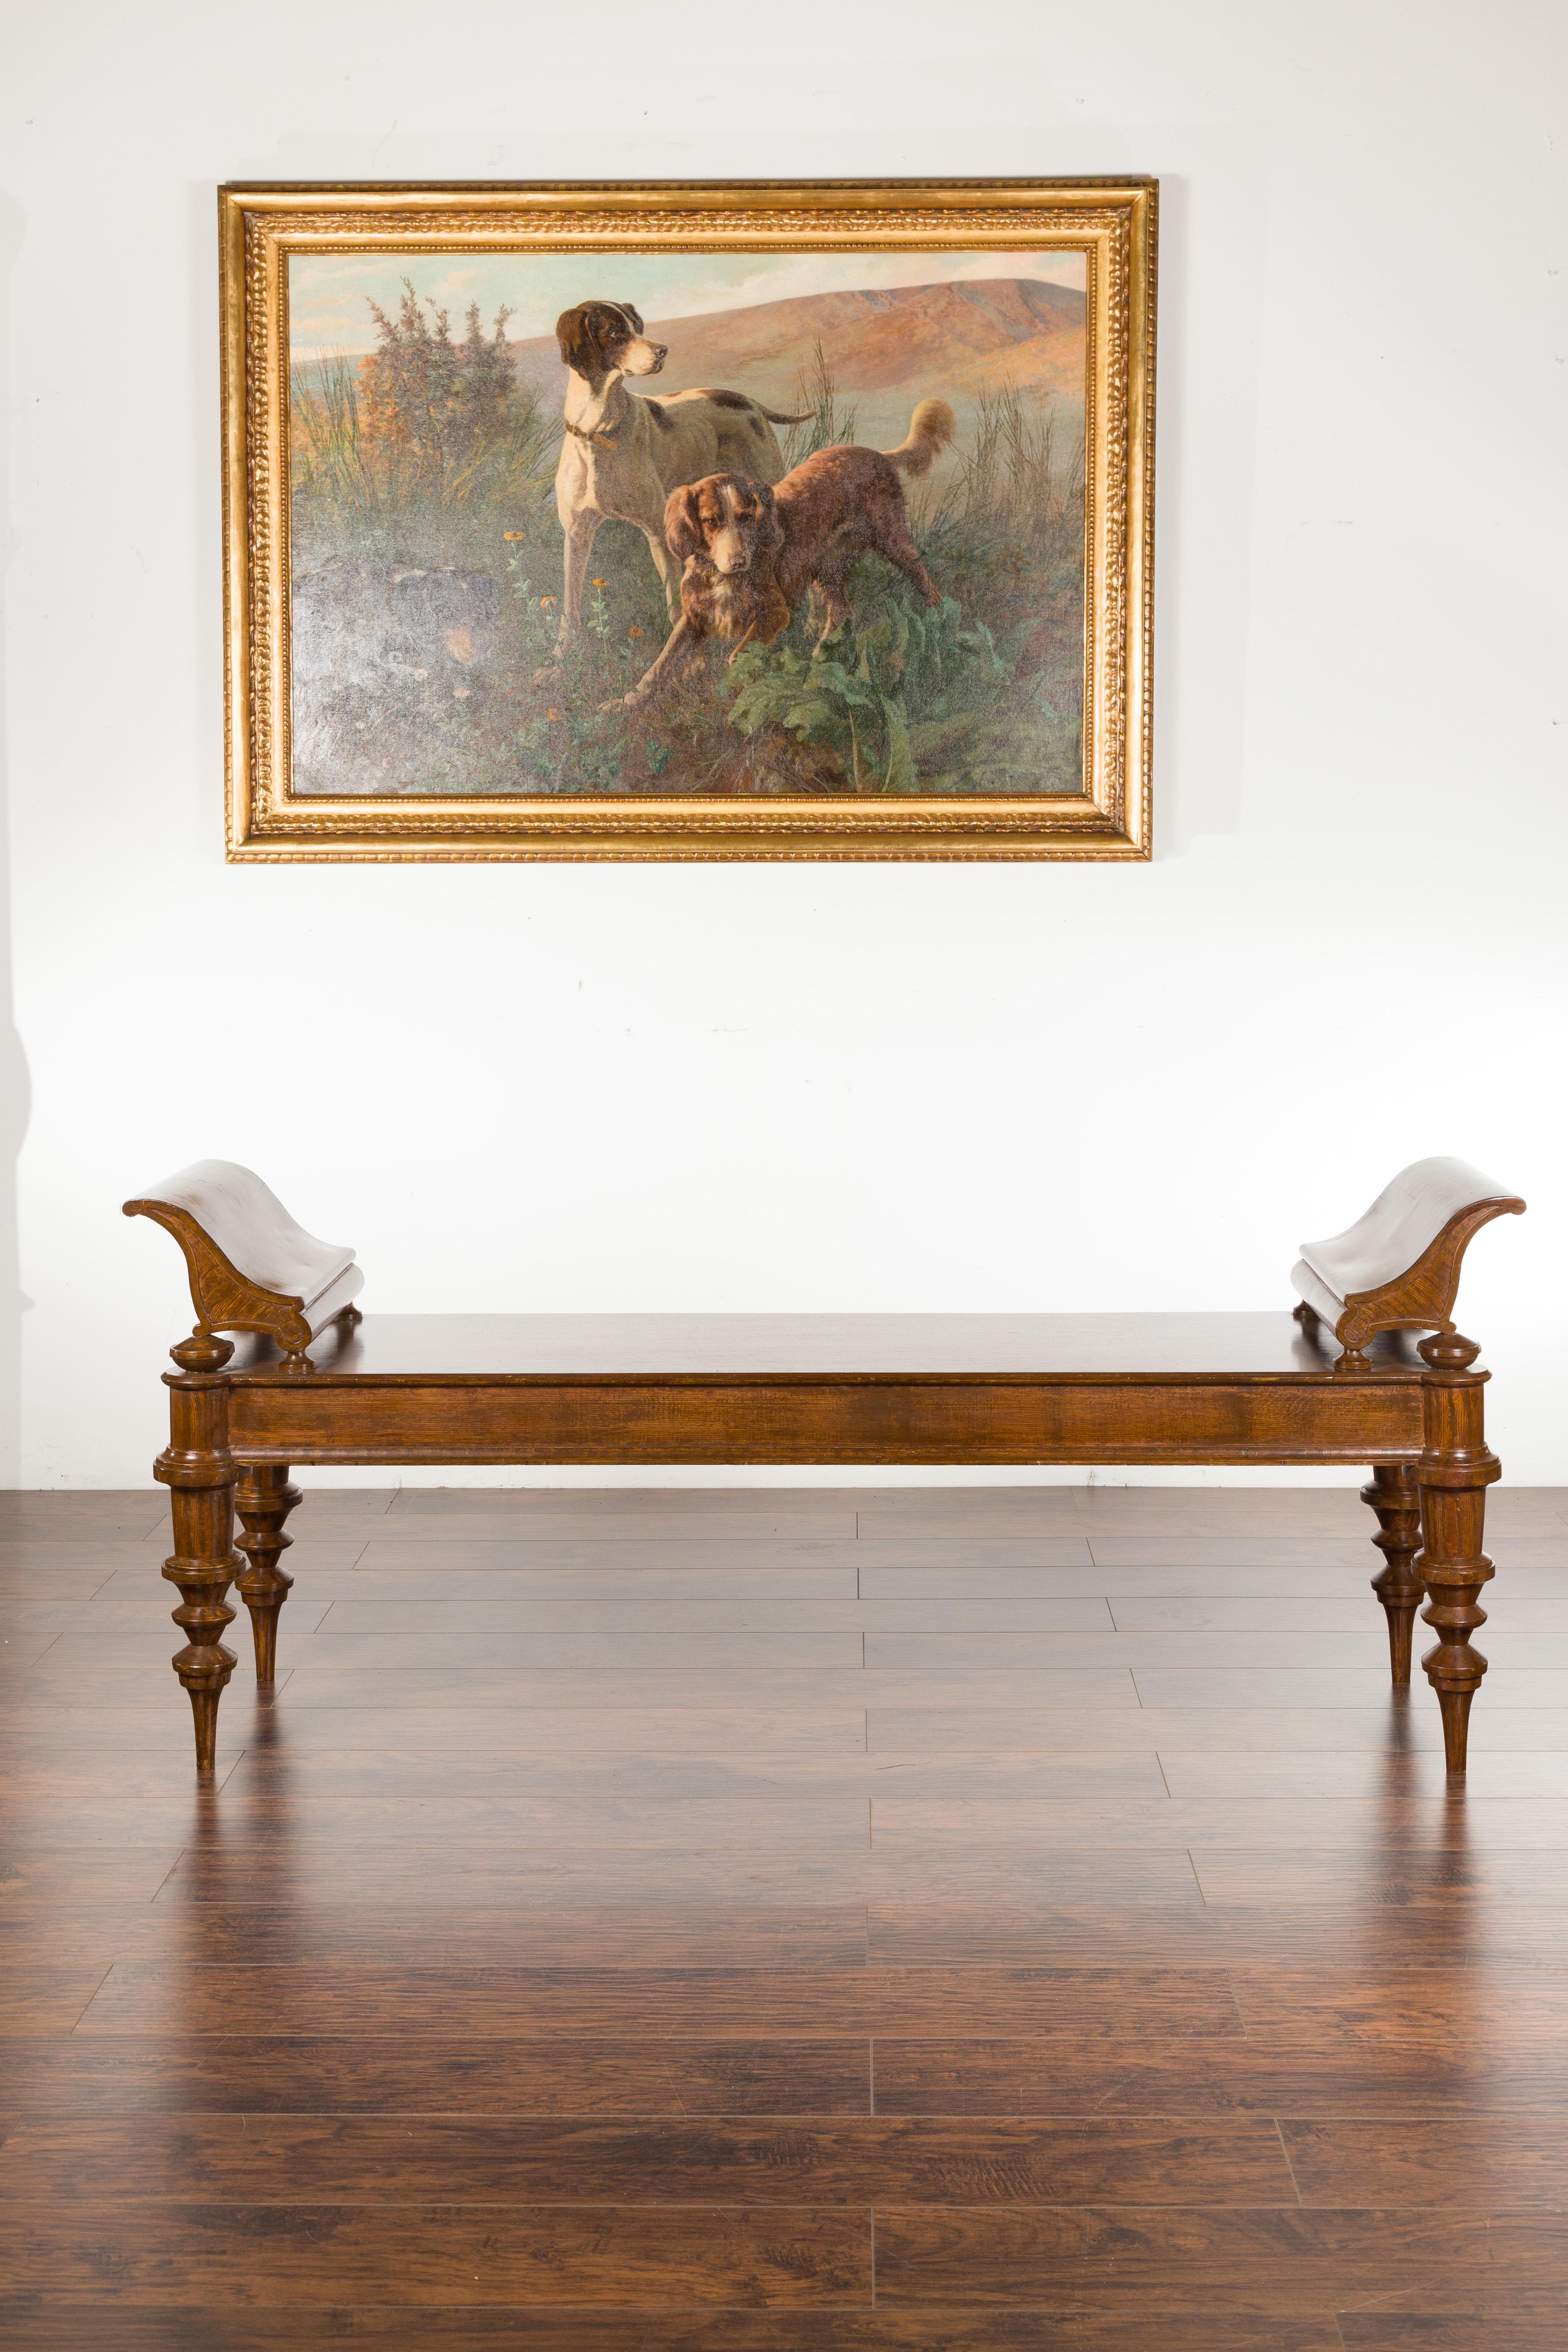 A massive English mahogany bench from the 20th century, with curving arm supports and turned legs. Created in England during the 20th century, this mahogany bench features a long rectangular seat flanked with curving arm supports. Raised on four